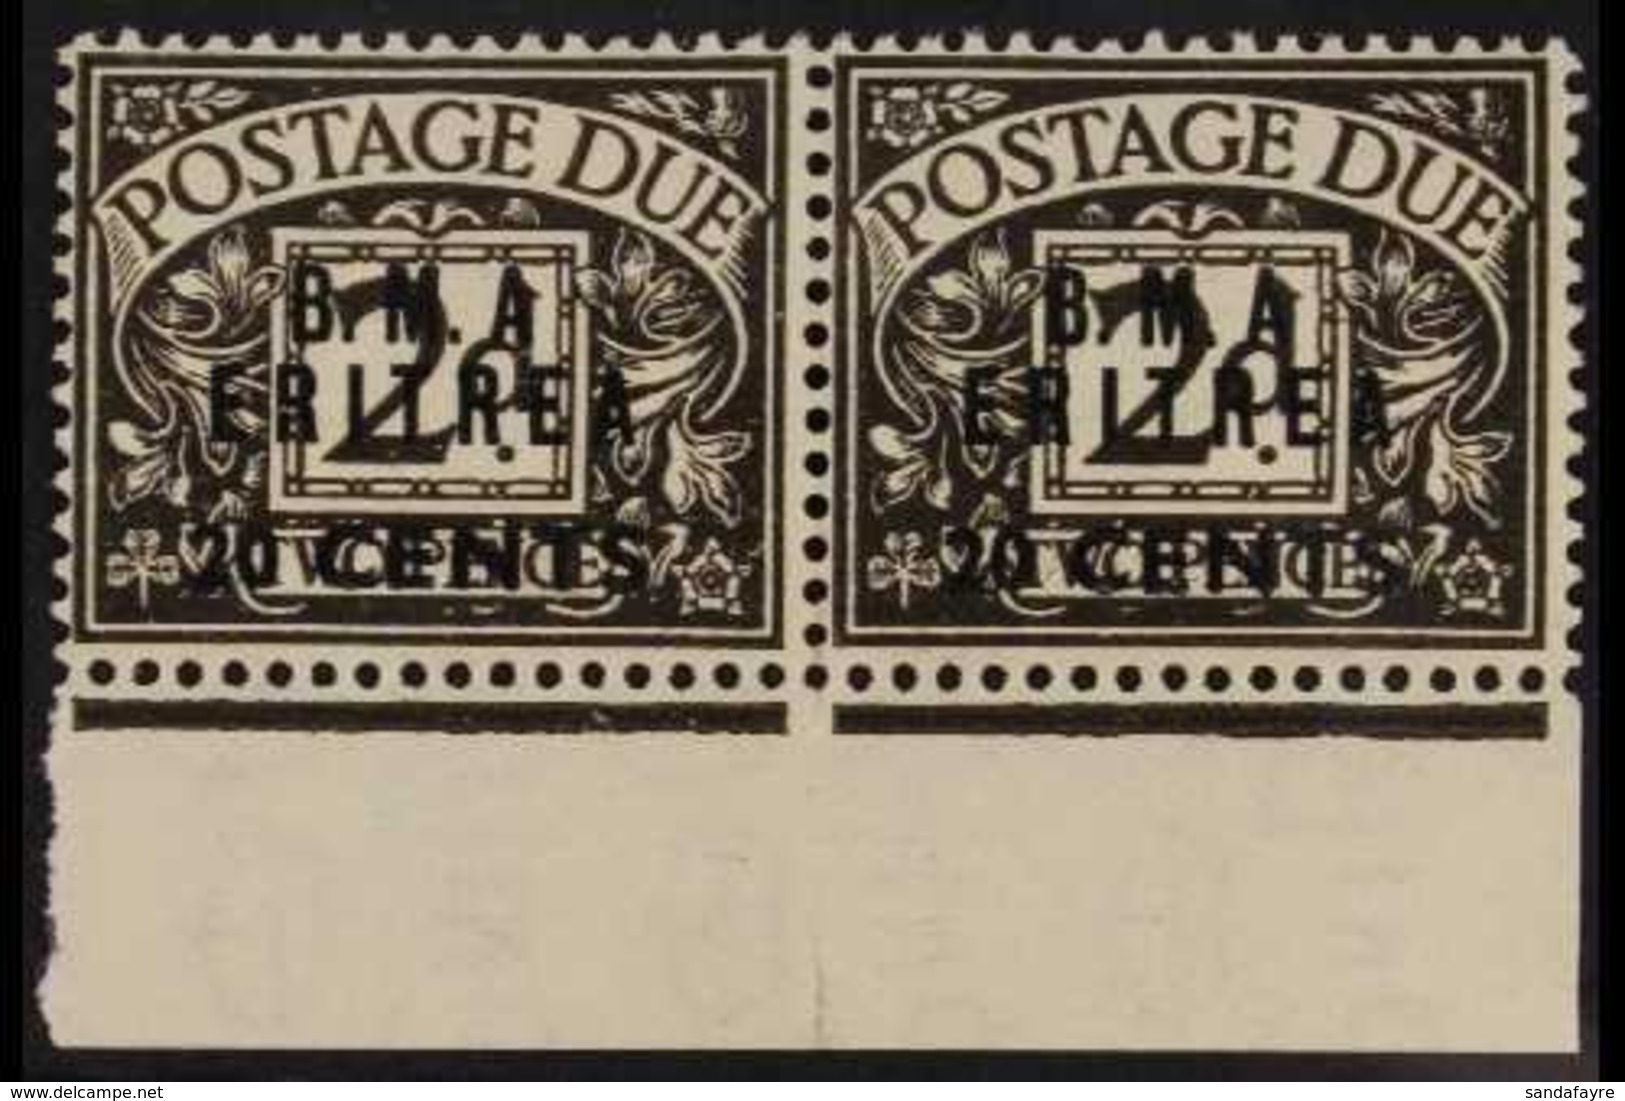 ERITREA  POSTAGE DUES 1948 20c On 2d Agate, Horizontal Pair Both Showing Variety "No Stop After A", SG ED 3a, Very Fine  - Italian Eastern Africa